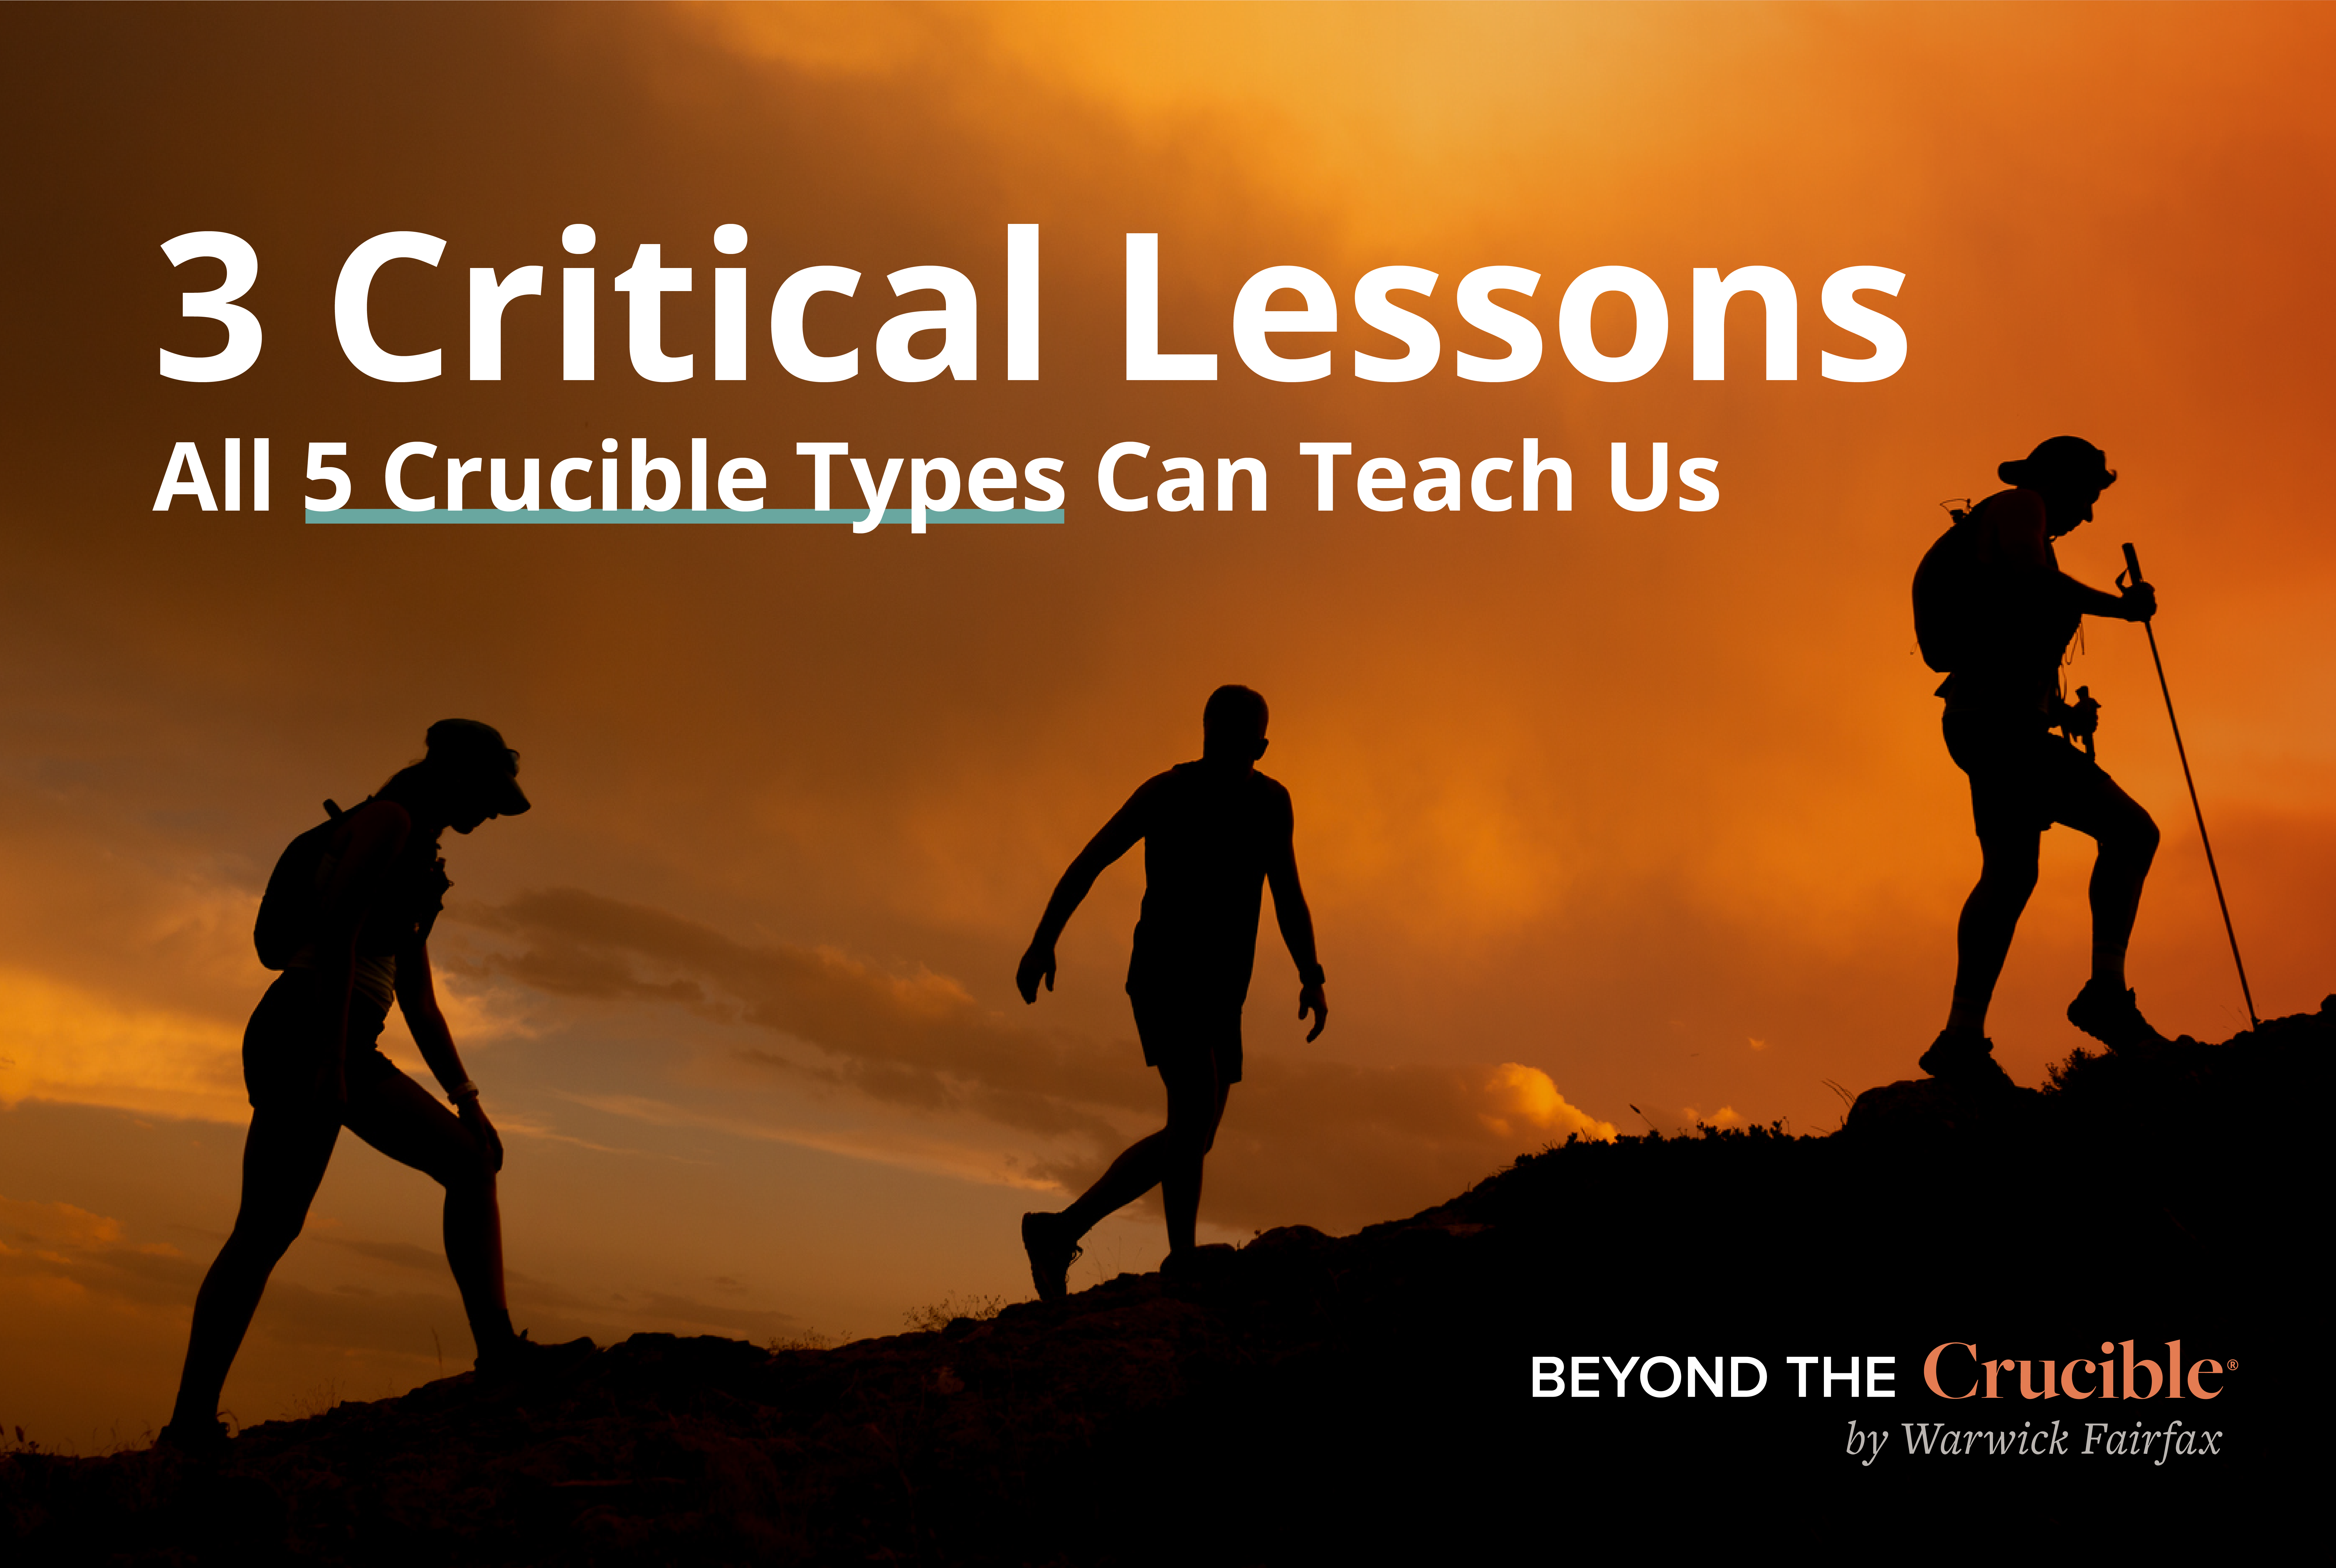 3 Critical Lessons All 5 Crucible Types Can Teach Us